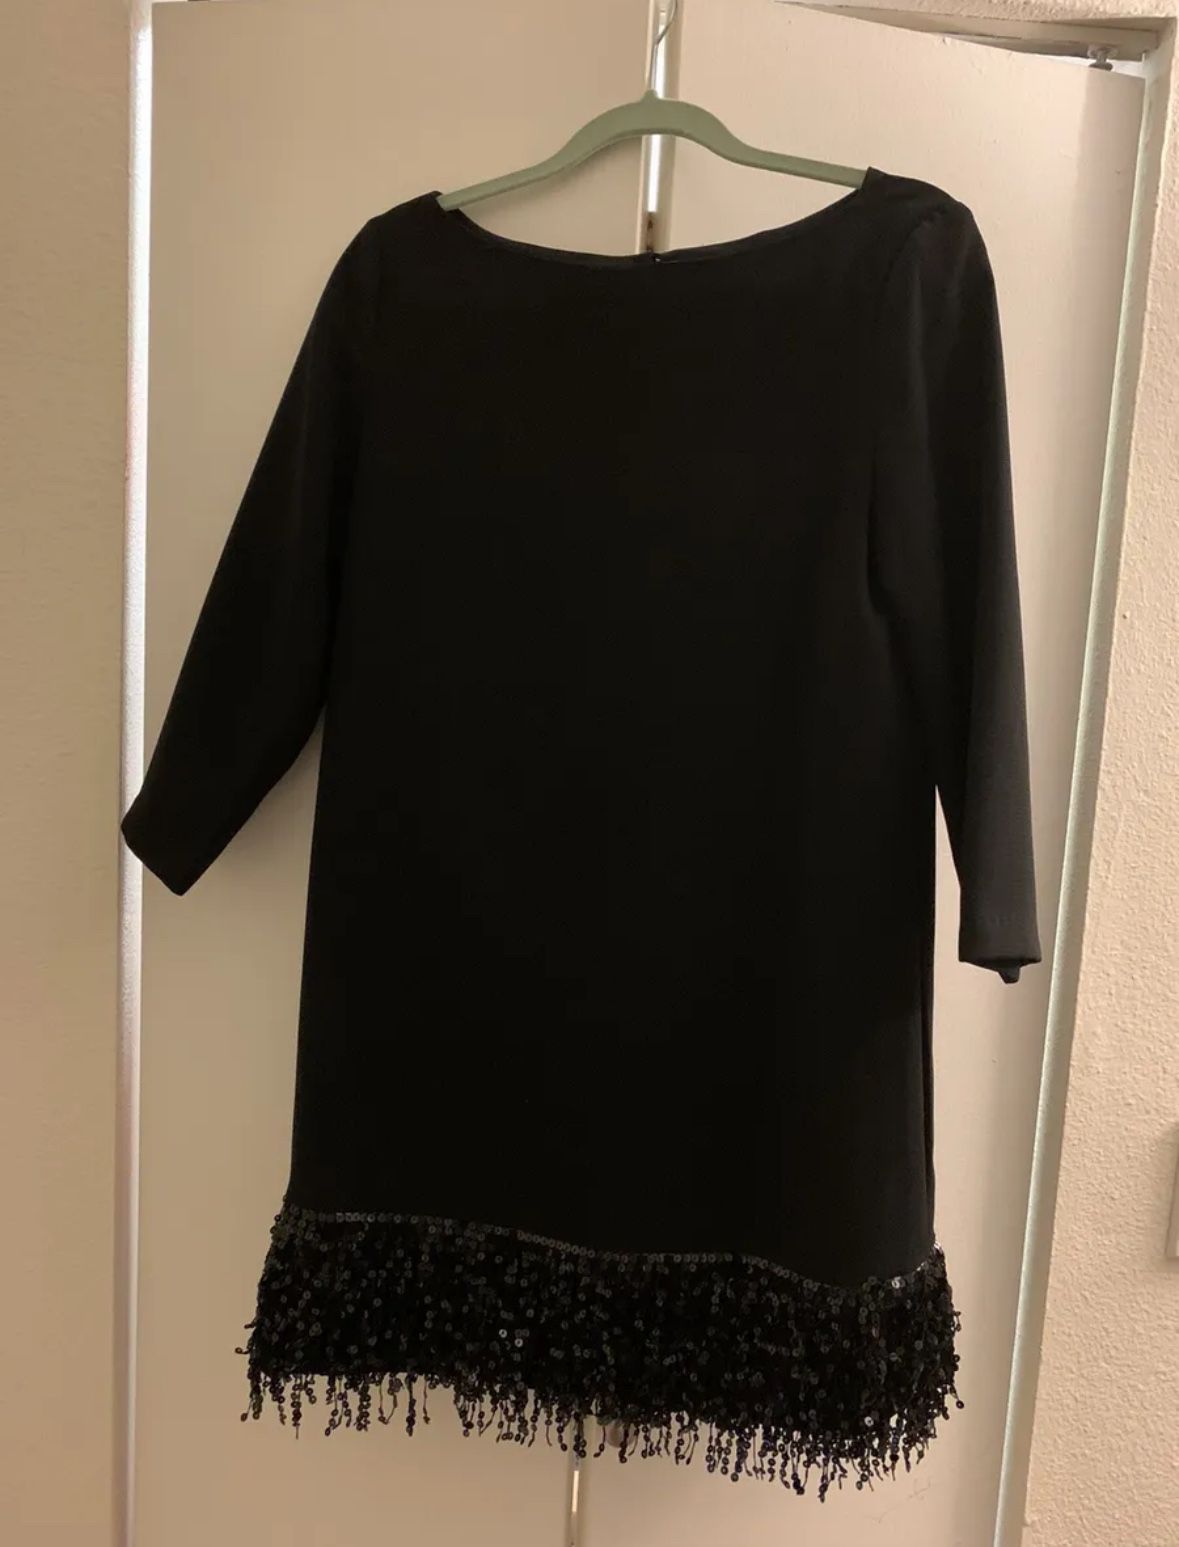 Kate Spade black dress w/ sequins on The Bottom Of The Dress size 6